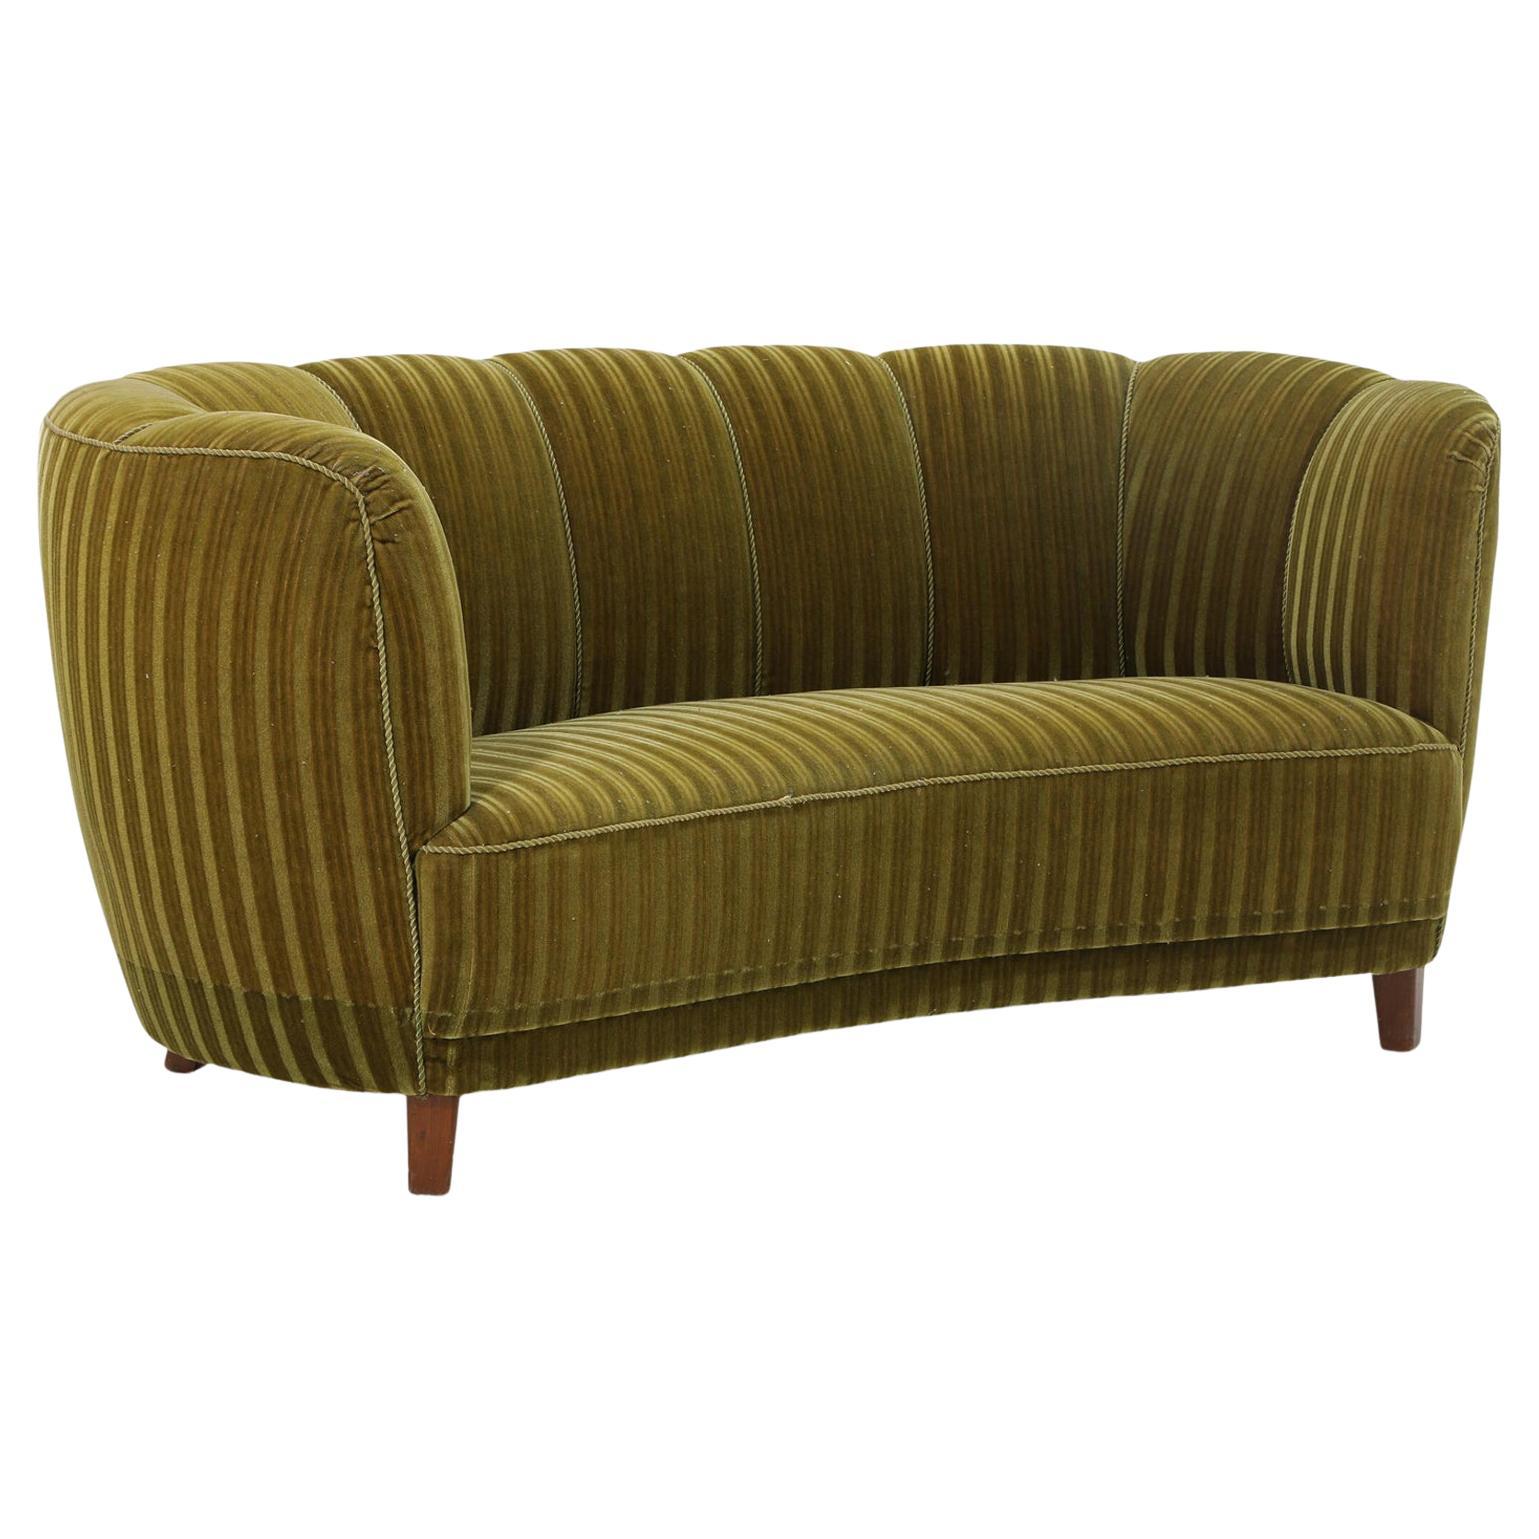 1940s Curved Danish Sofa in Olive Velour For Sale